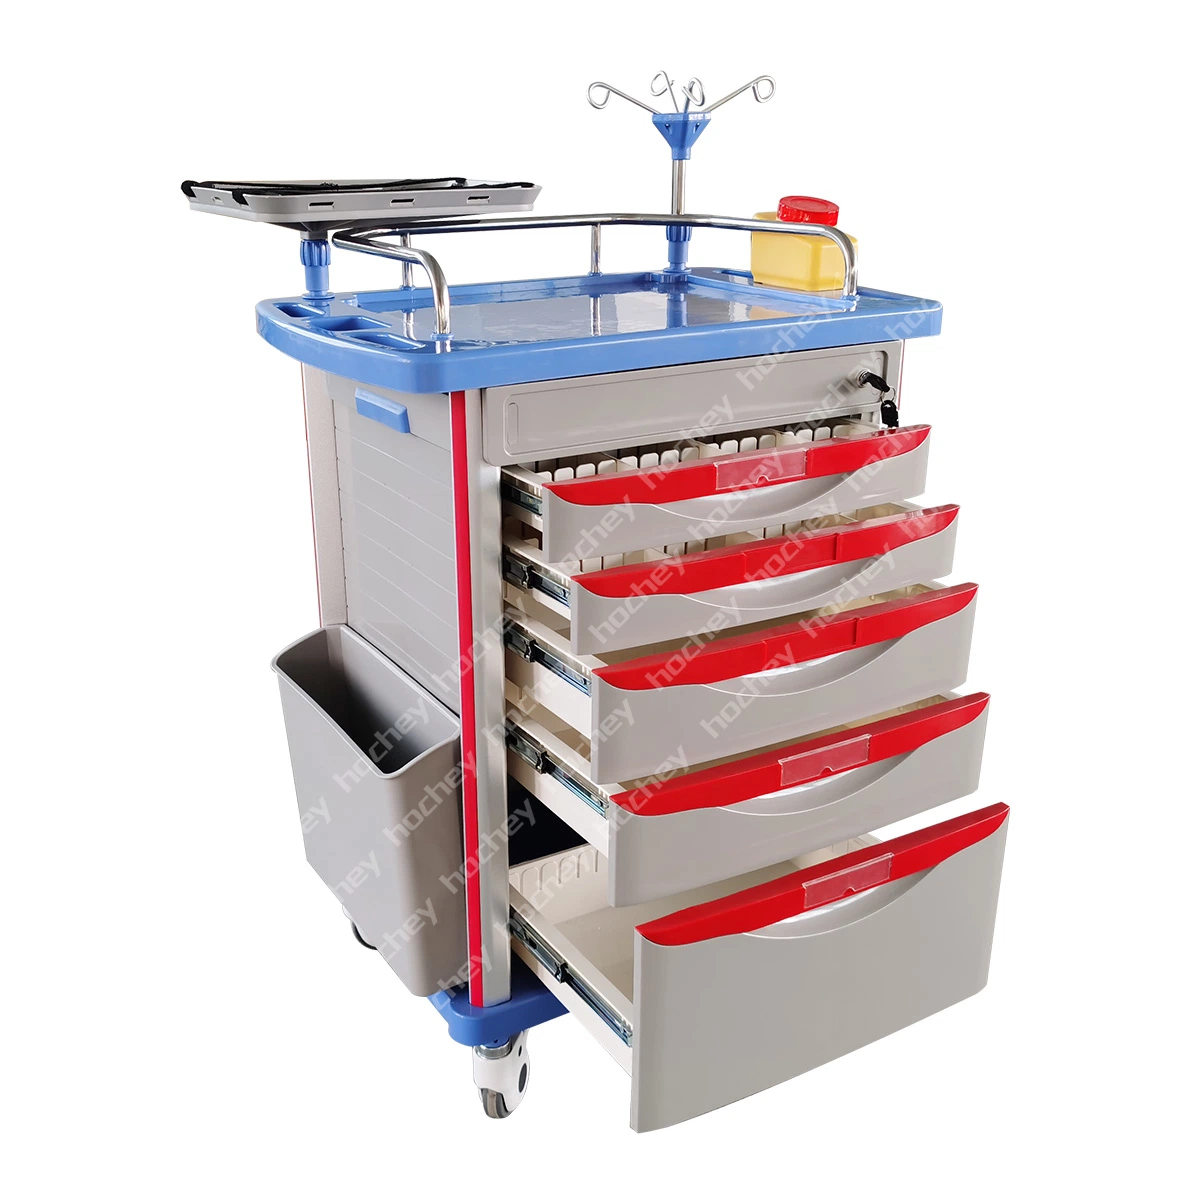 Hochey Medical Cheap Price ABS Plastic Medical Anesthesia Emergency Trolley Clinical Medicine Hospital Trolley